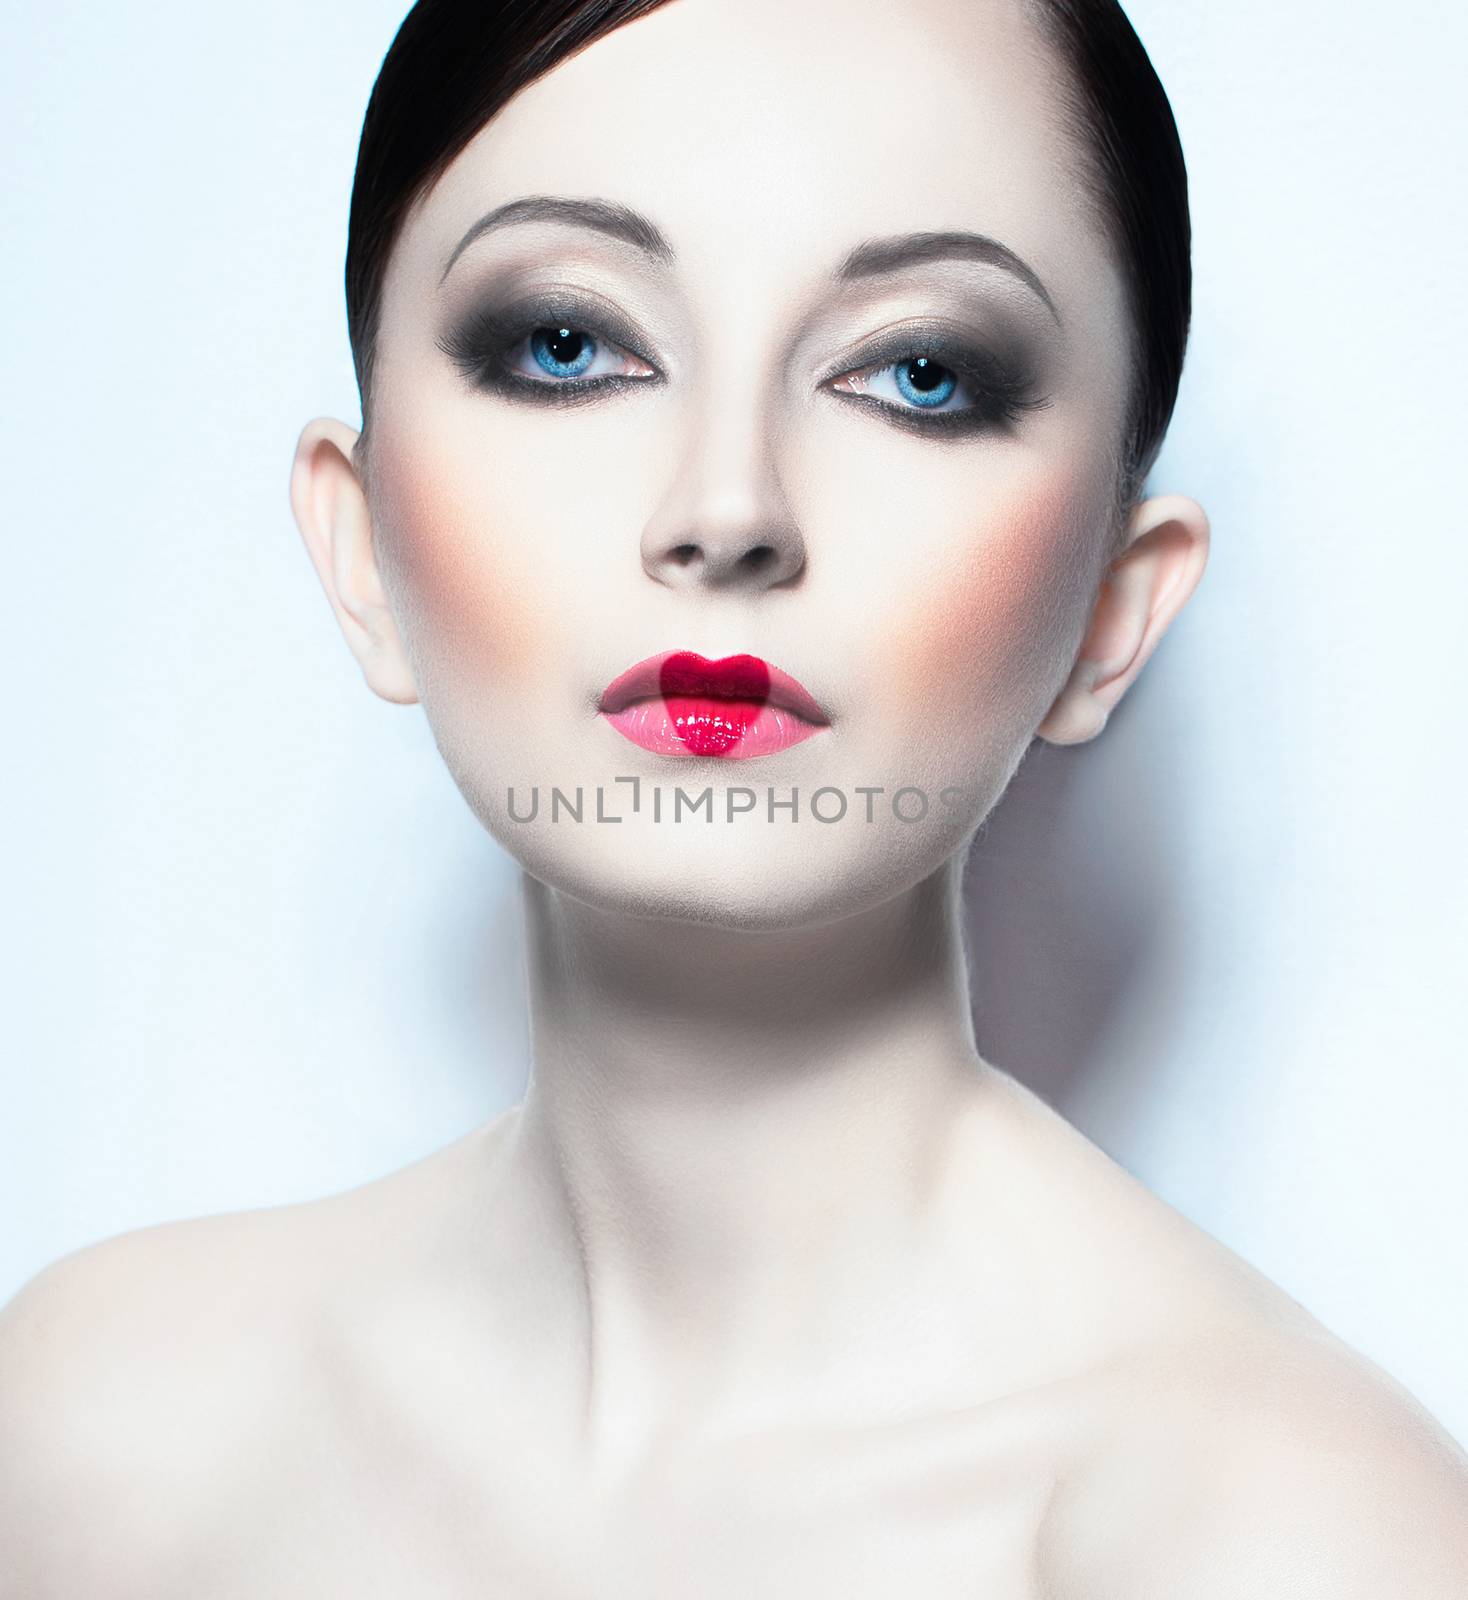 Portrait of a beautiful woman like doll with a glamorous cool ma by vlad_star